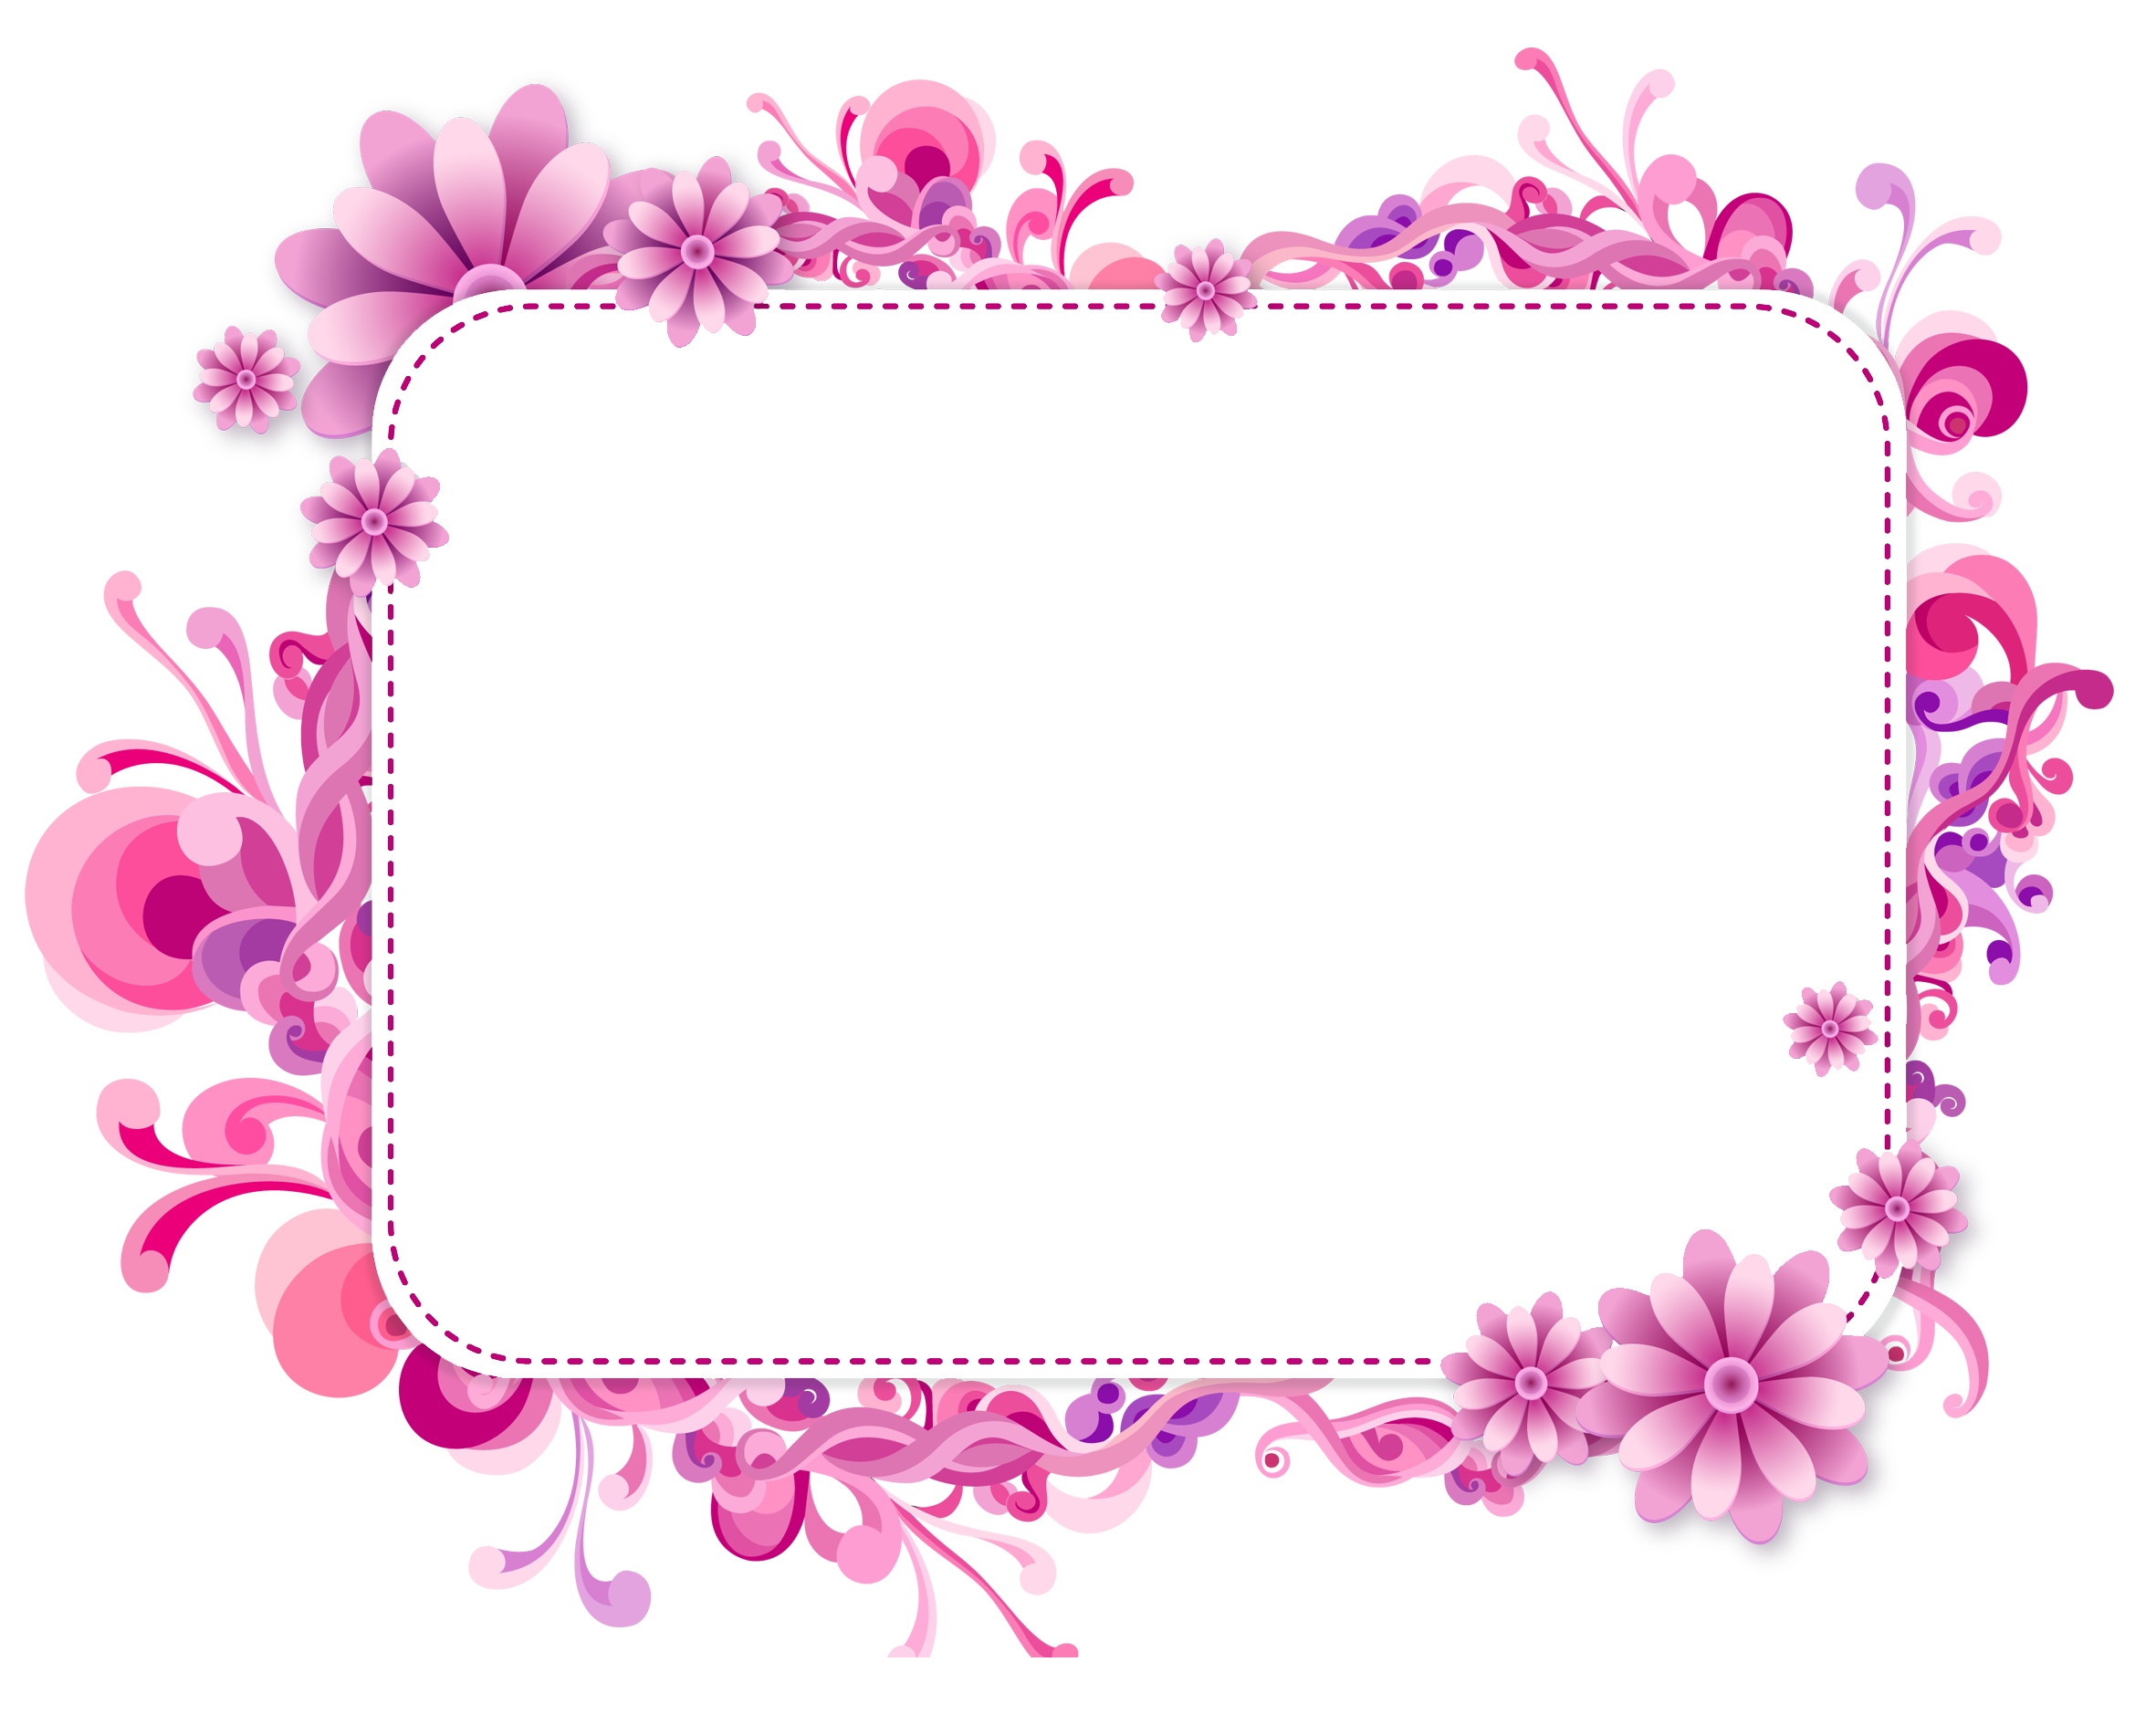 Purple Vector Borders and Frames